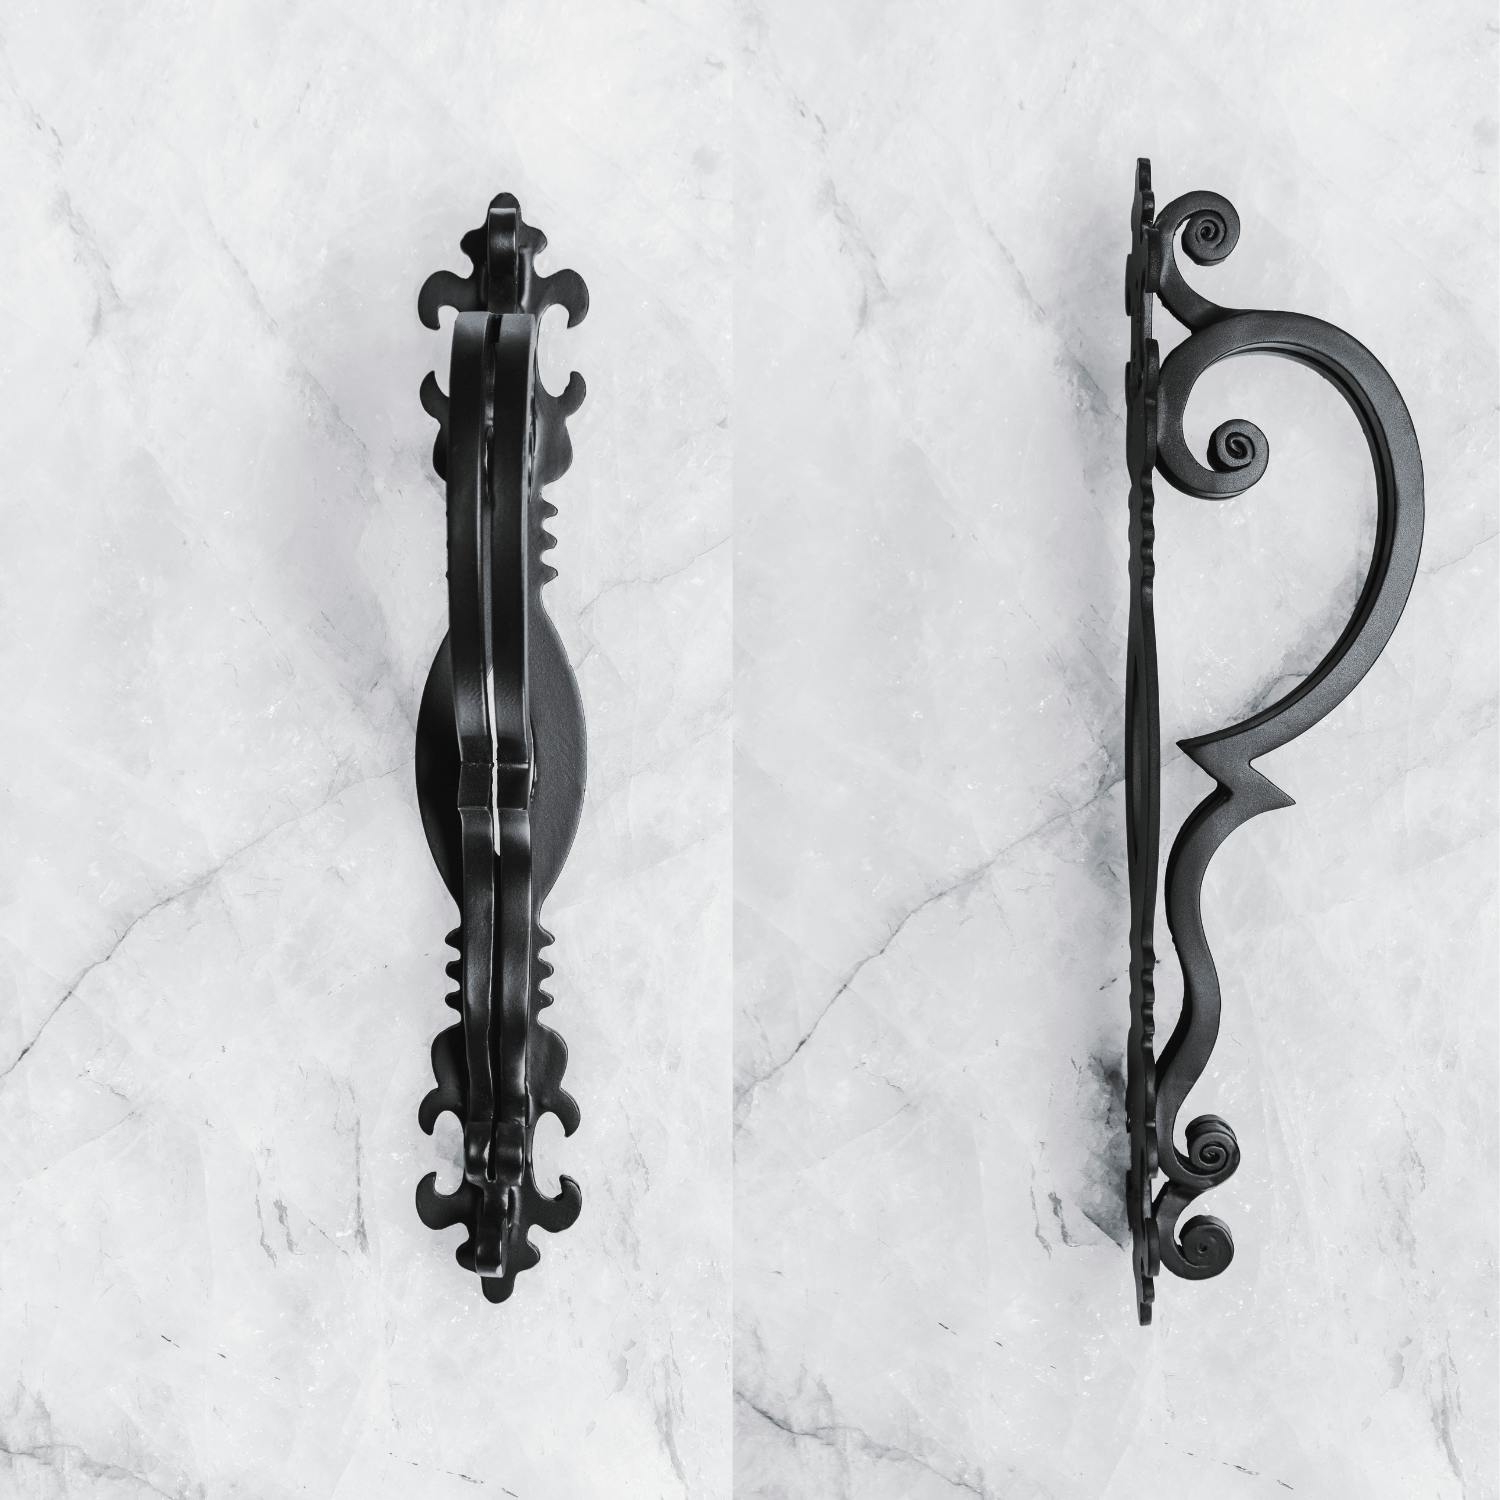 Unique iron door pull with artistic design and bold statement-making style